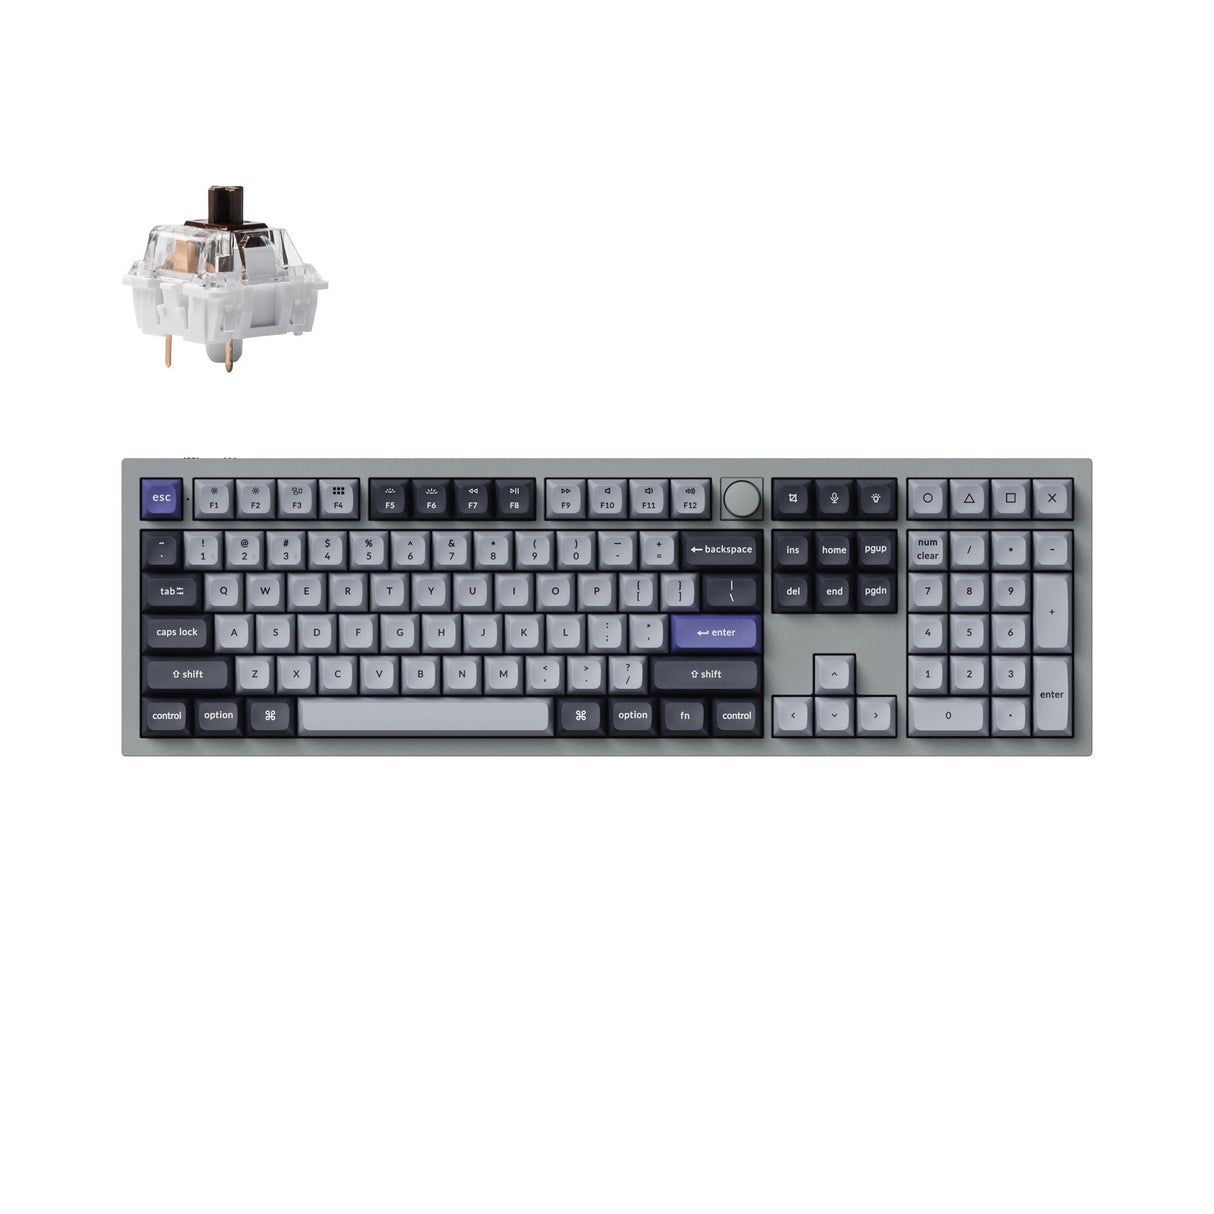 Keychron Q6 Pro QMK/VIA wireless custom mechanical keyboard 100 percent layout full aluminum grey frame for Mac WIndows Linux with RGB backlight and hot-swappable K Pro brown